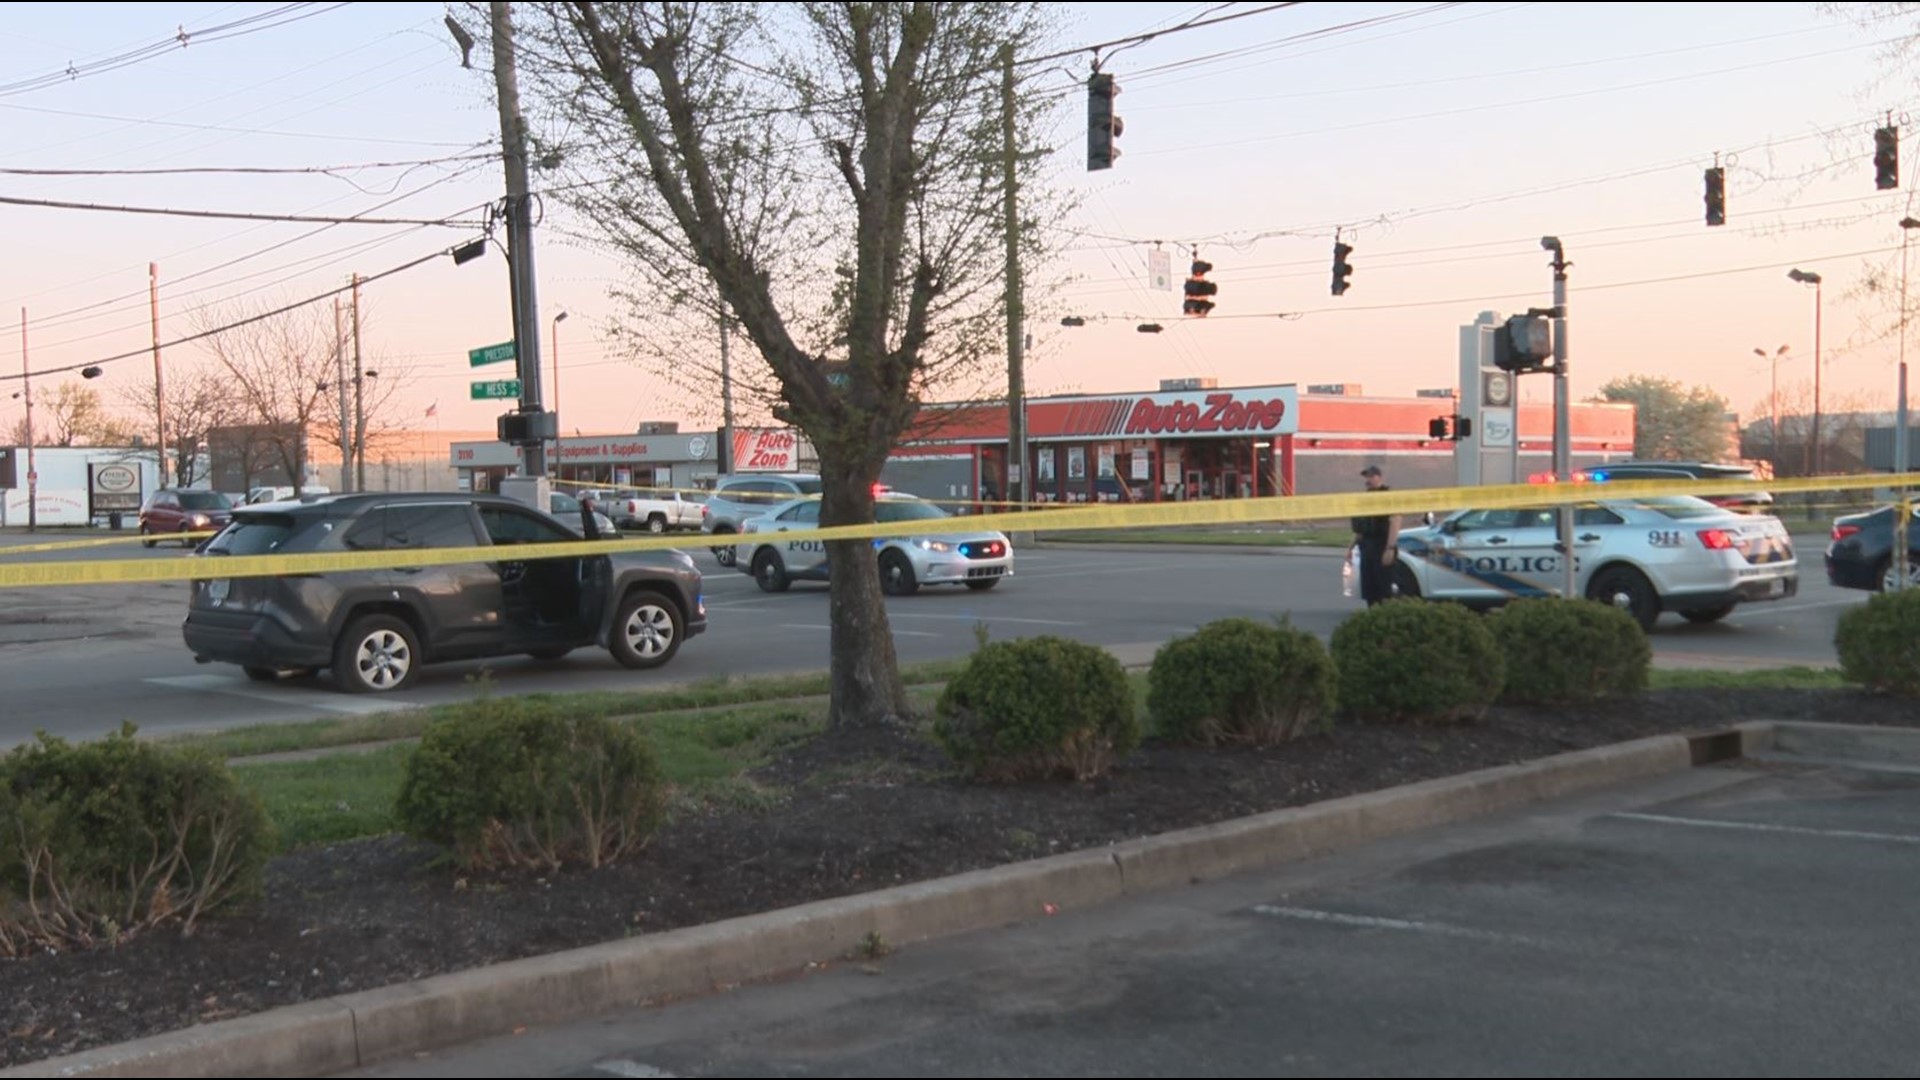 LMPD said they are unable to confirm how many gunshots were fired in the area, and no arrests have been made.